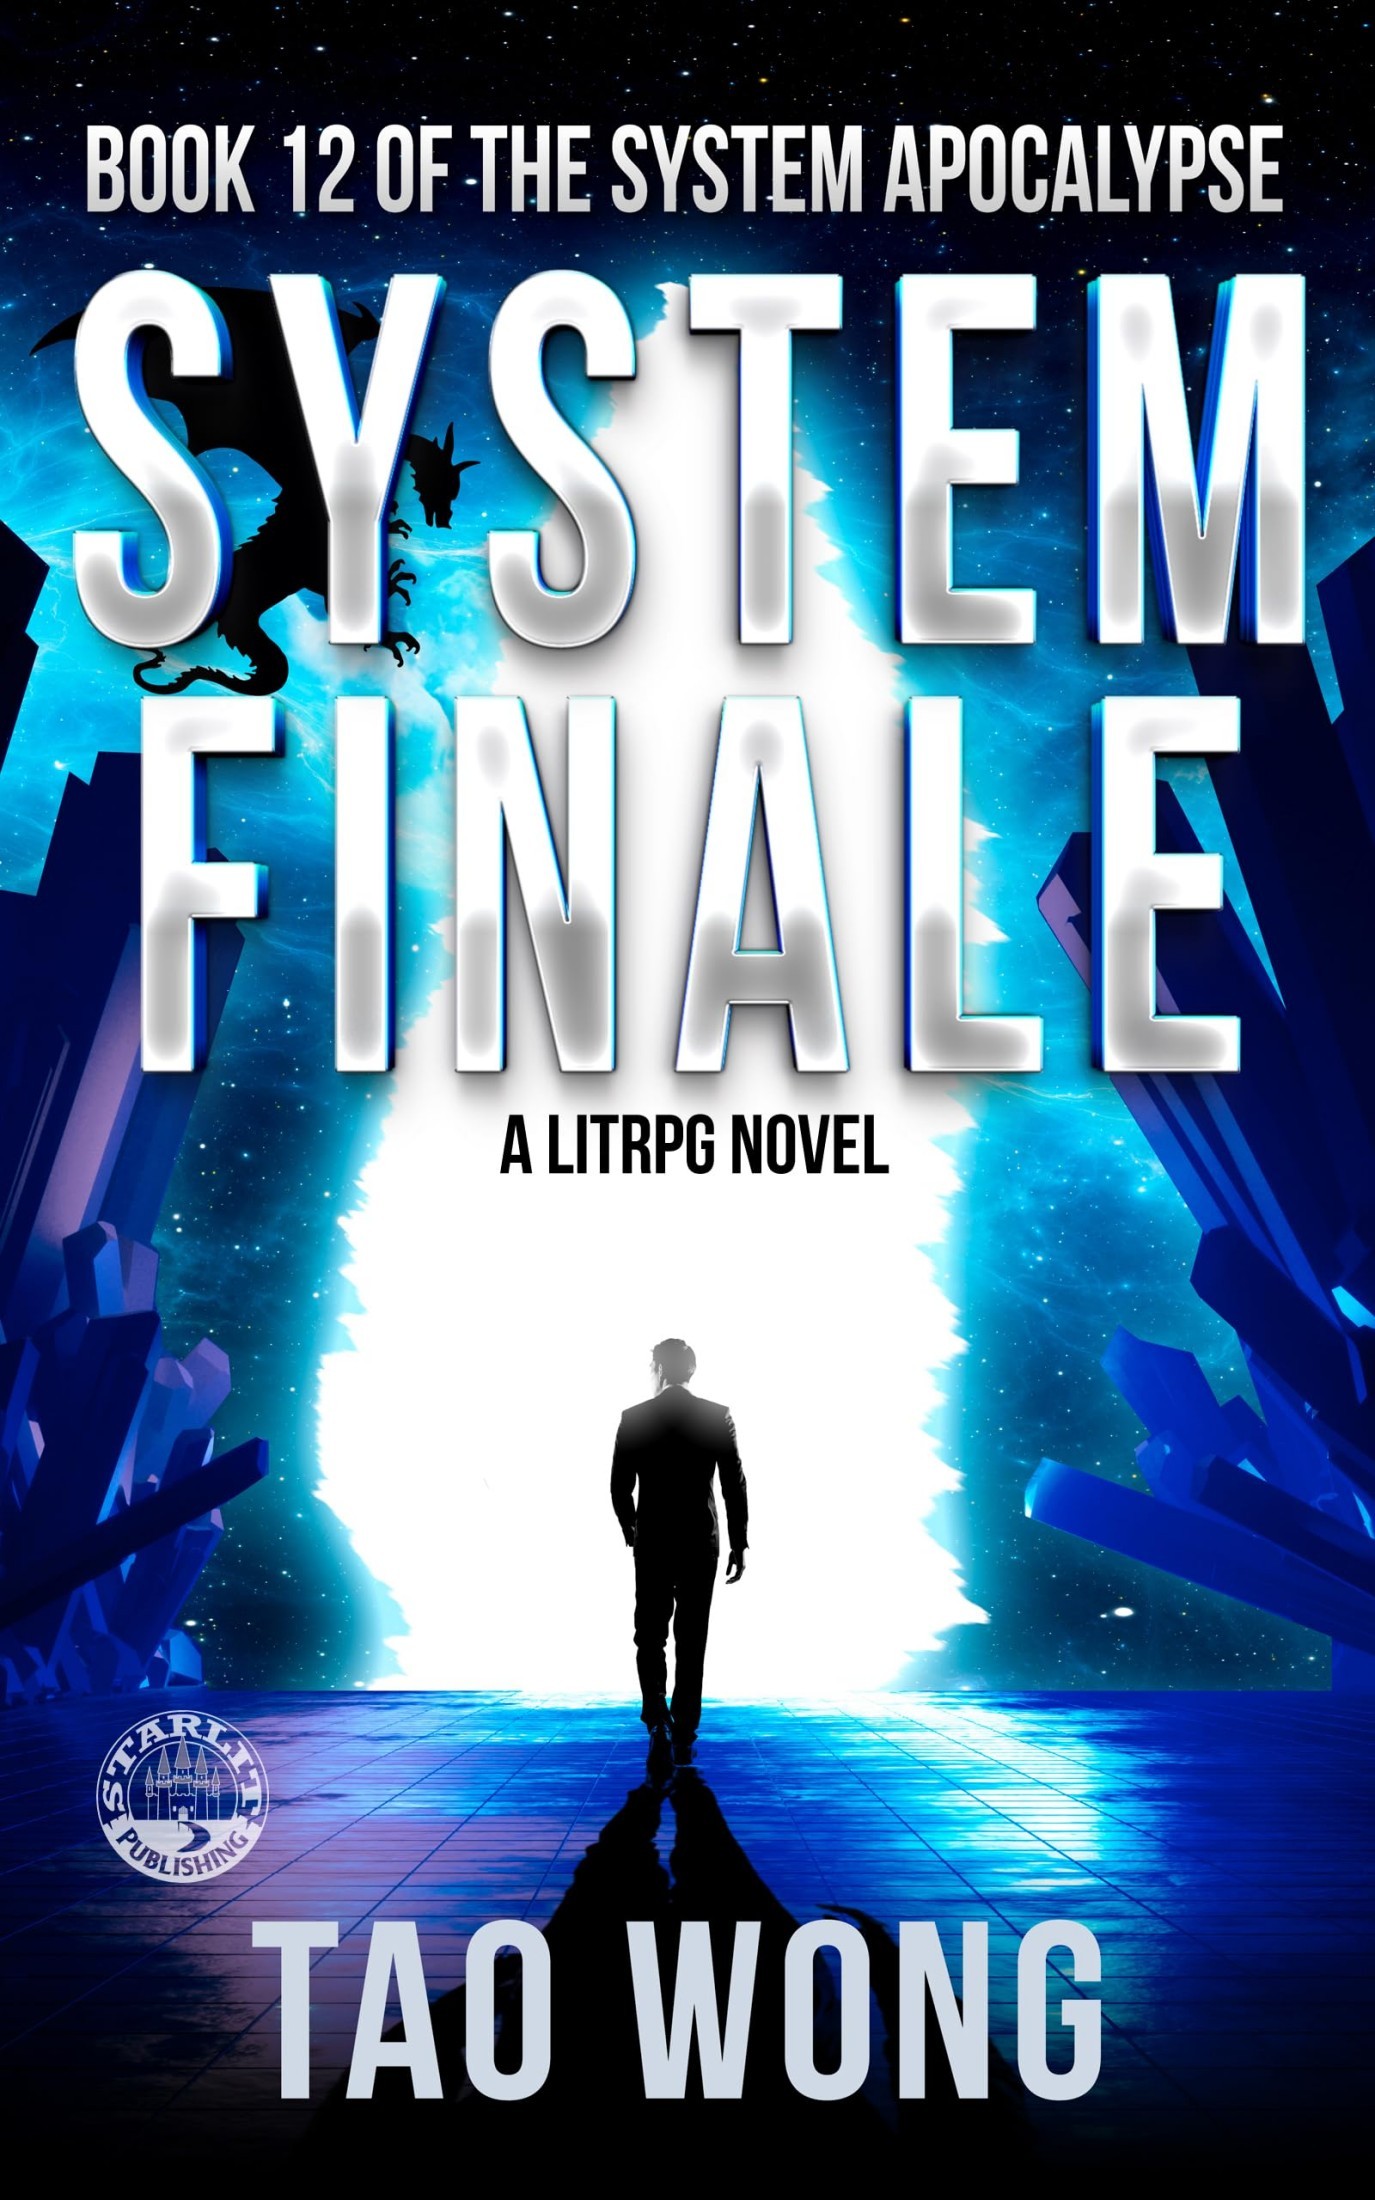 System Finale